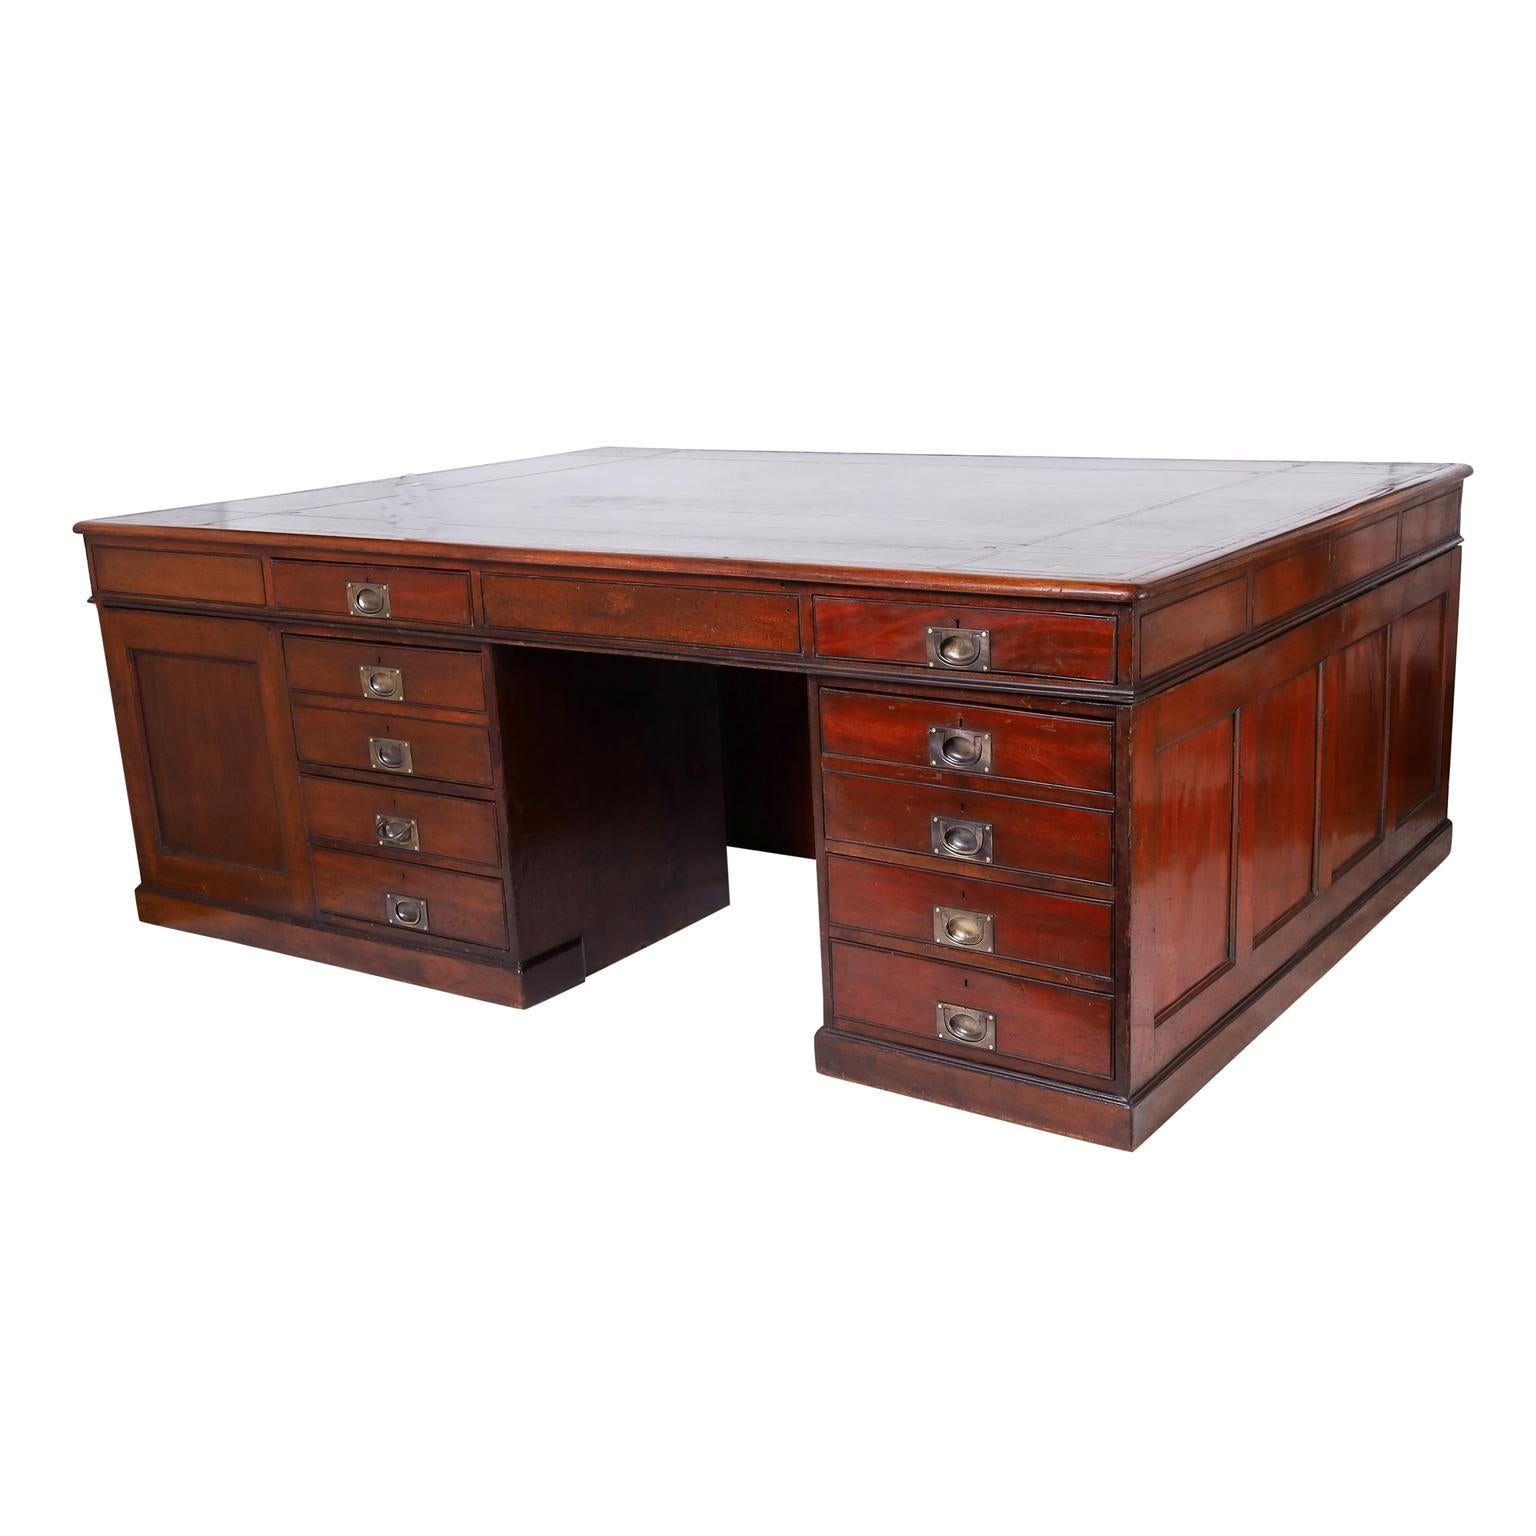 Hand-Crafted British Colonial Antique Campaign Leather Top Three Person Desk or Workspace For Sale